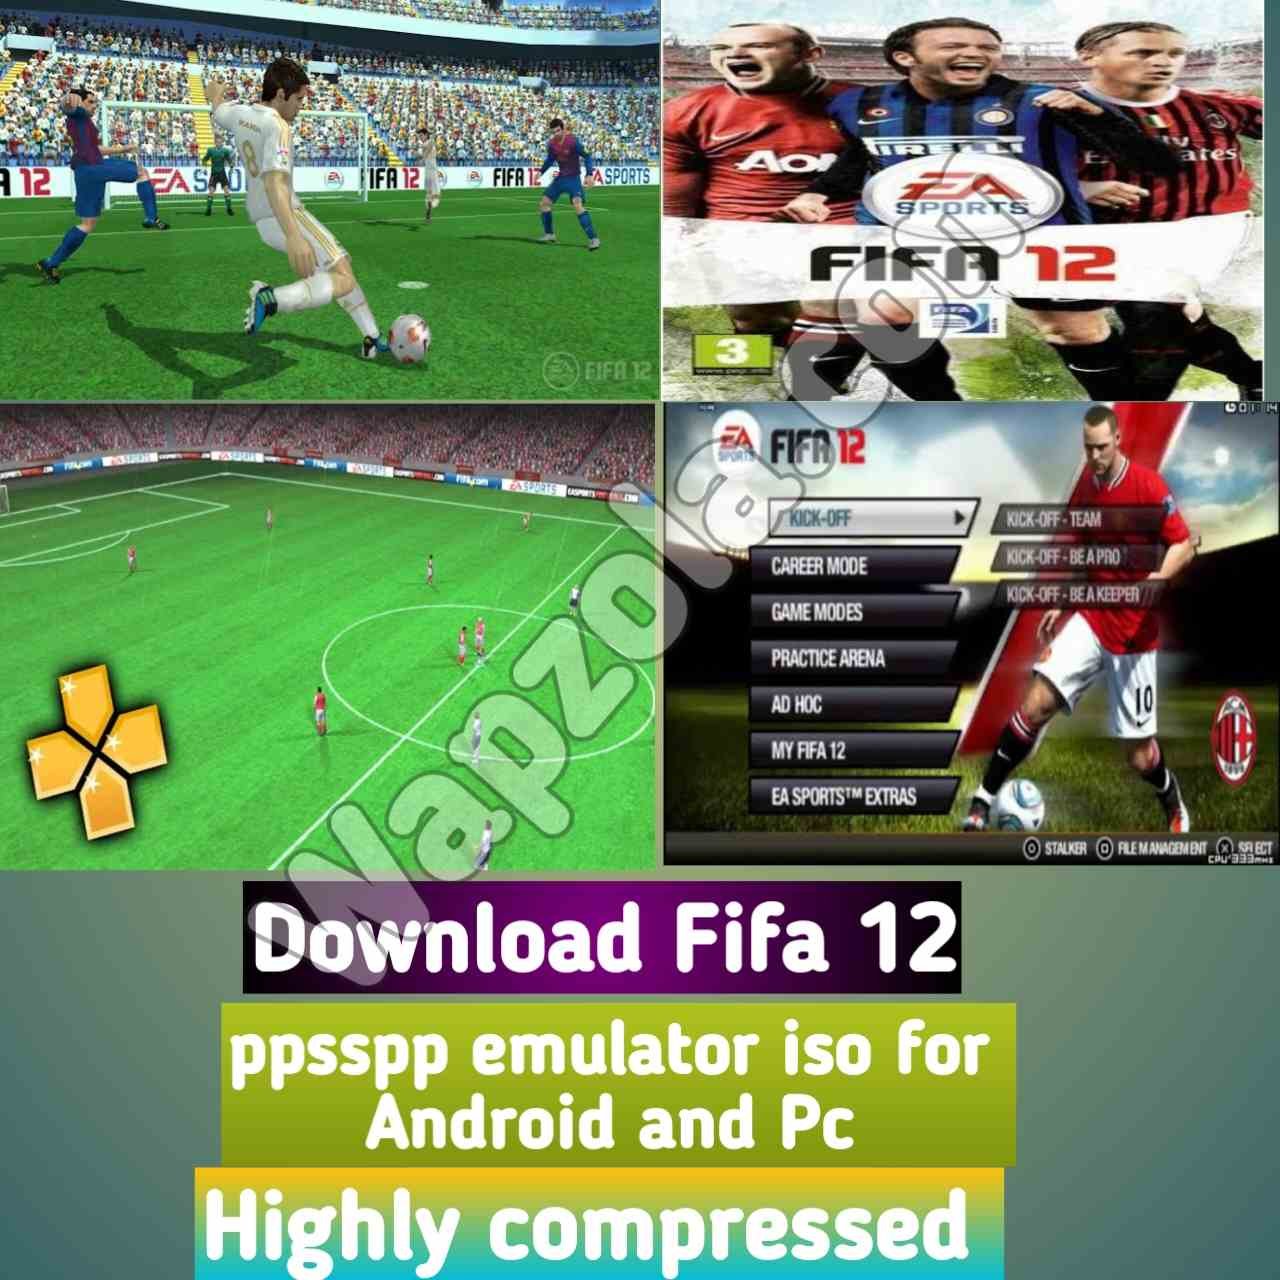 You are currently viewing [Download] FIFA 12 ppsspp emulator – PSP APK Iso highly compressed 20MB